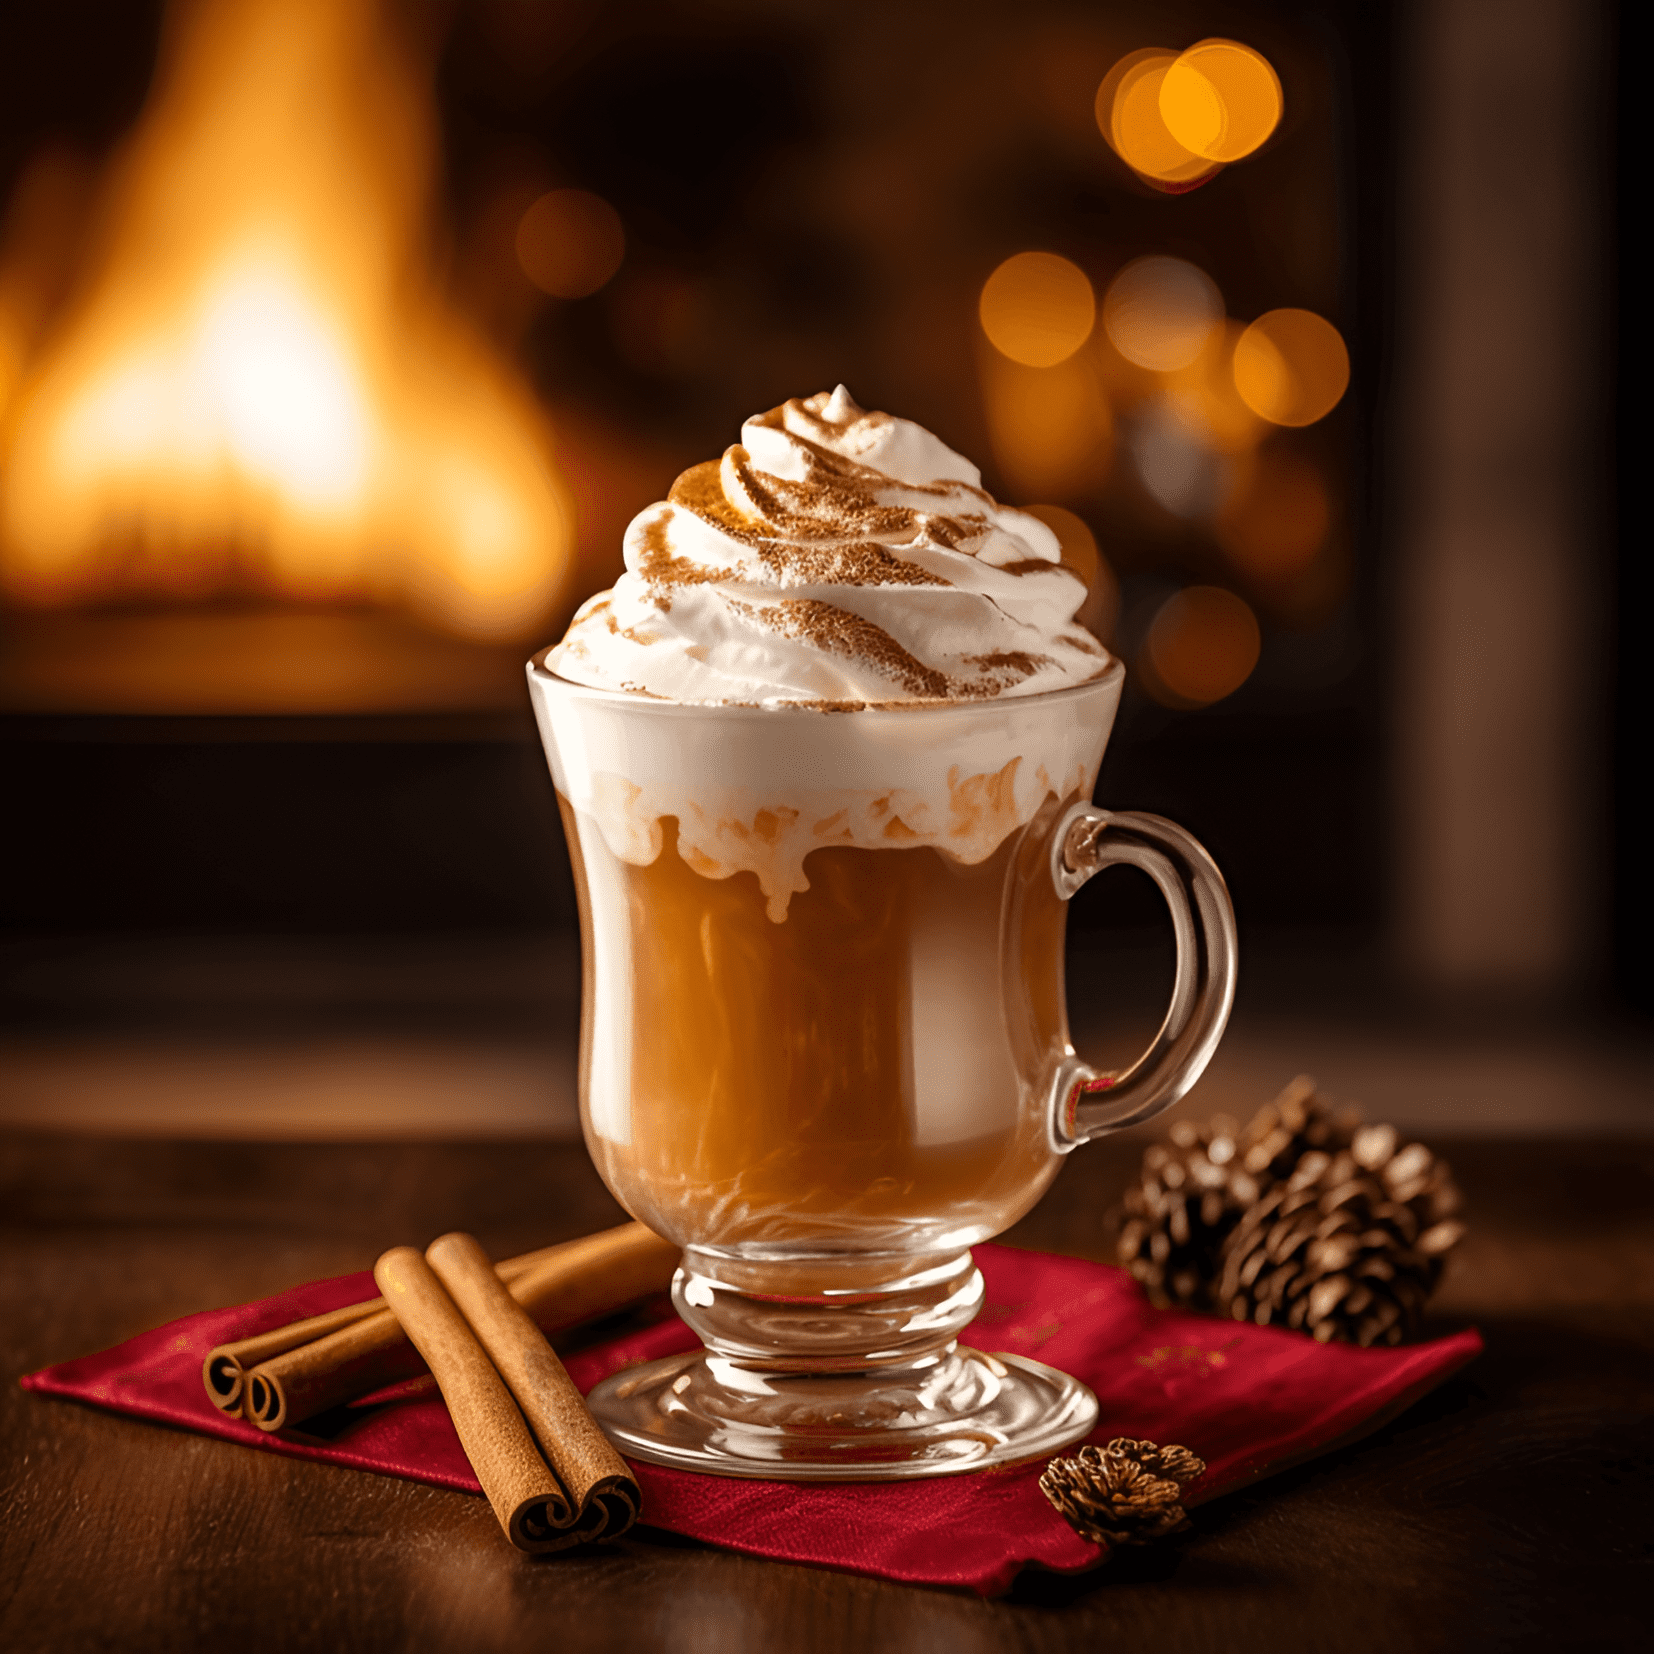 Hot Buttered Rum Cocktail Recipe - Hot Buttered Rum has a rich, creamy, and buttery taste with a hint of sweetness from the brown sugar and a warming sensation from the spices and rum. The flavors are well-balanced, making it a perfect winter cocktail.